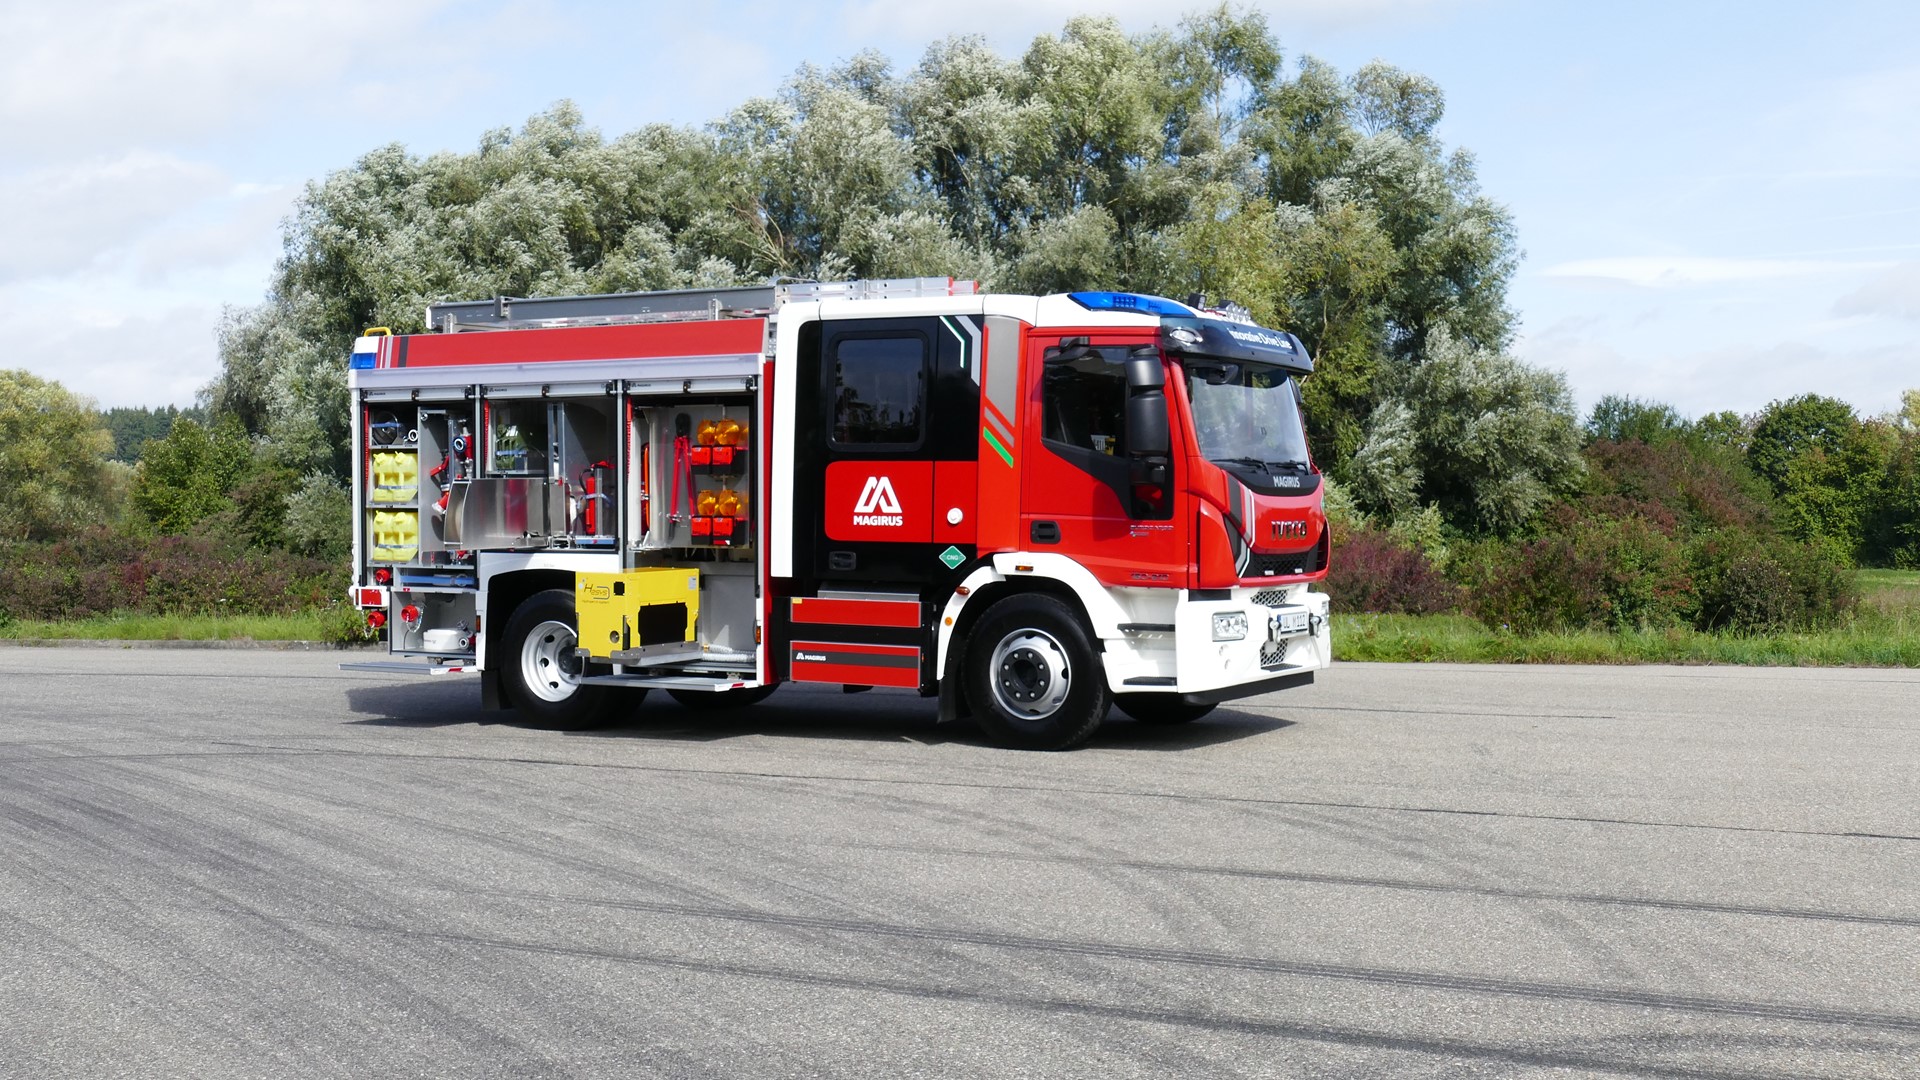 The first CNG-powered fire engine was unveiled in Ulm, Germany